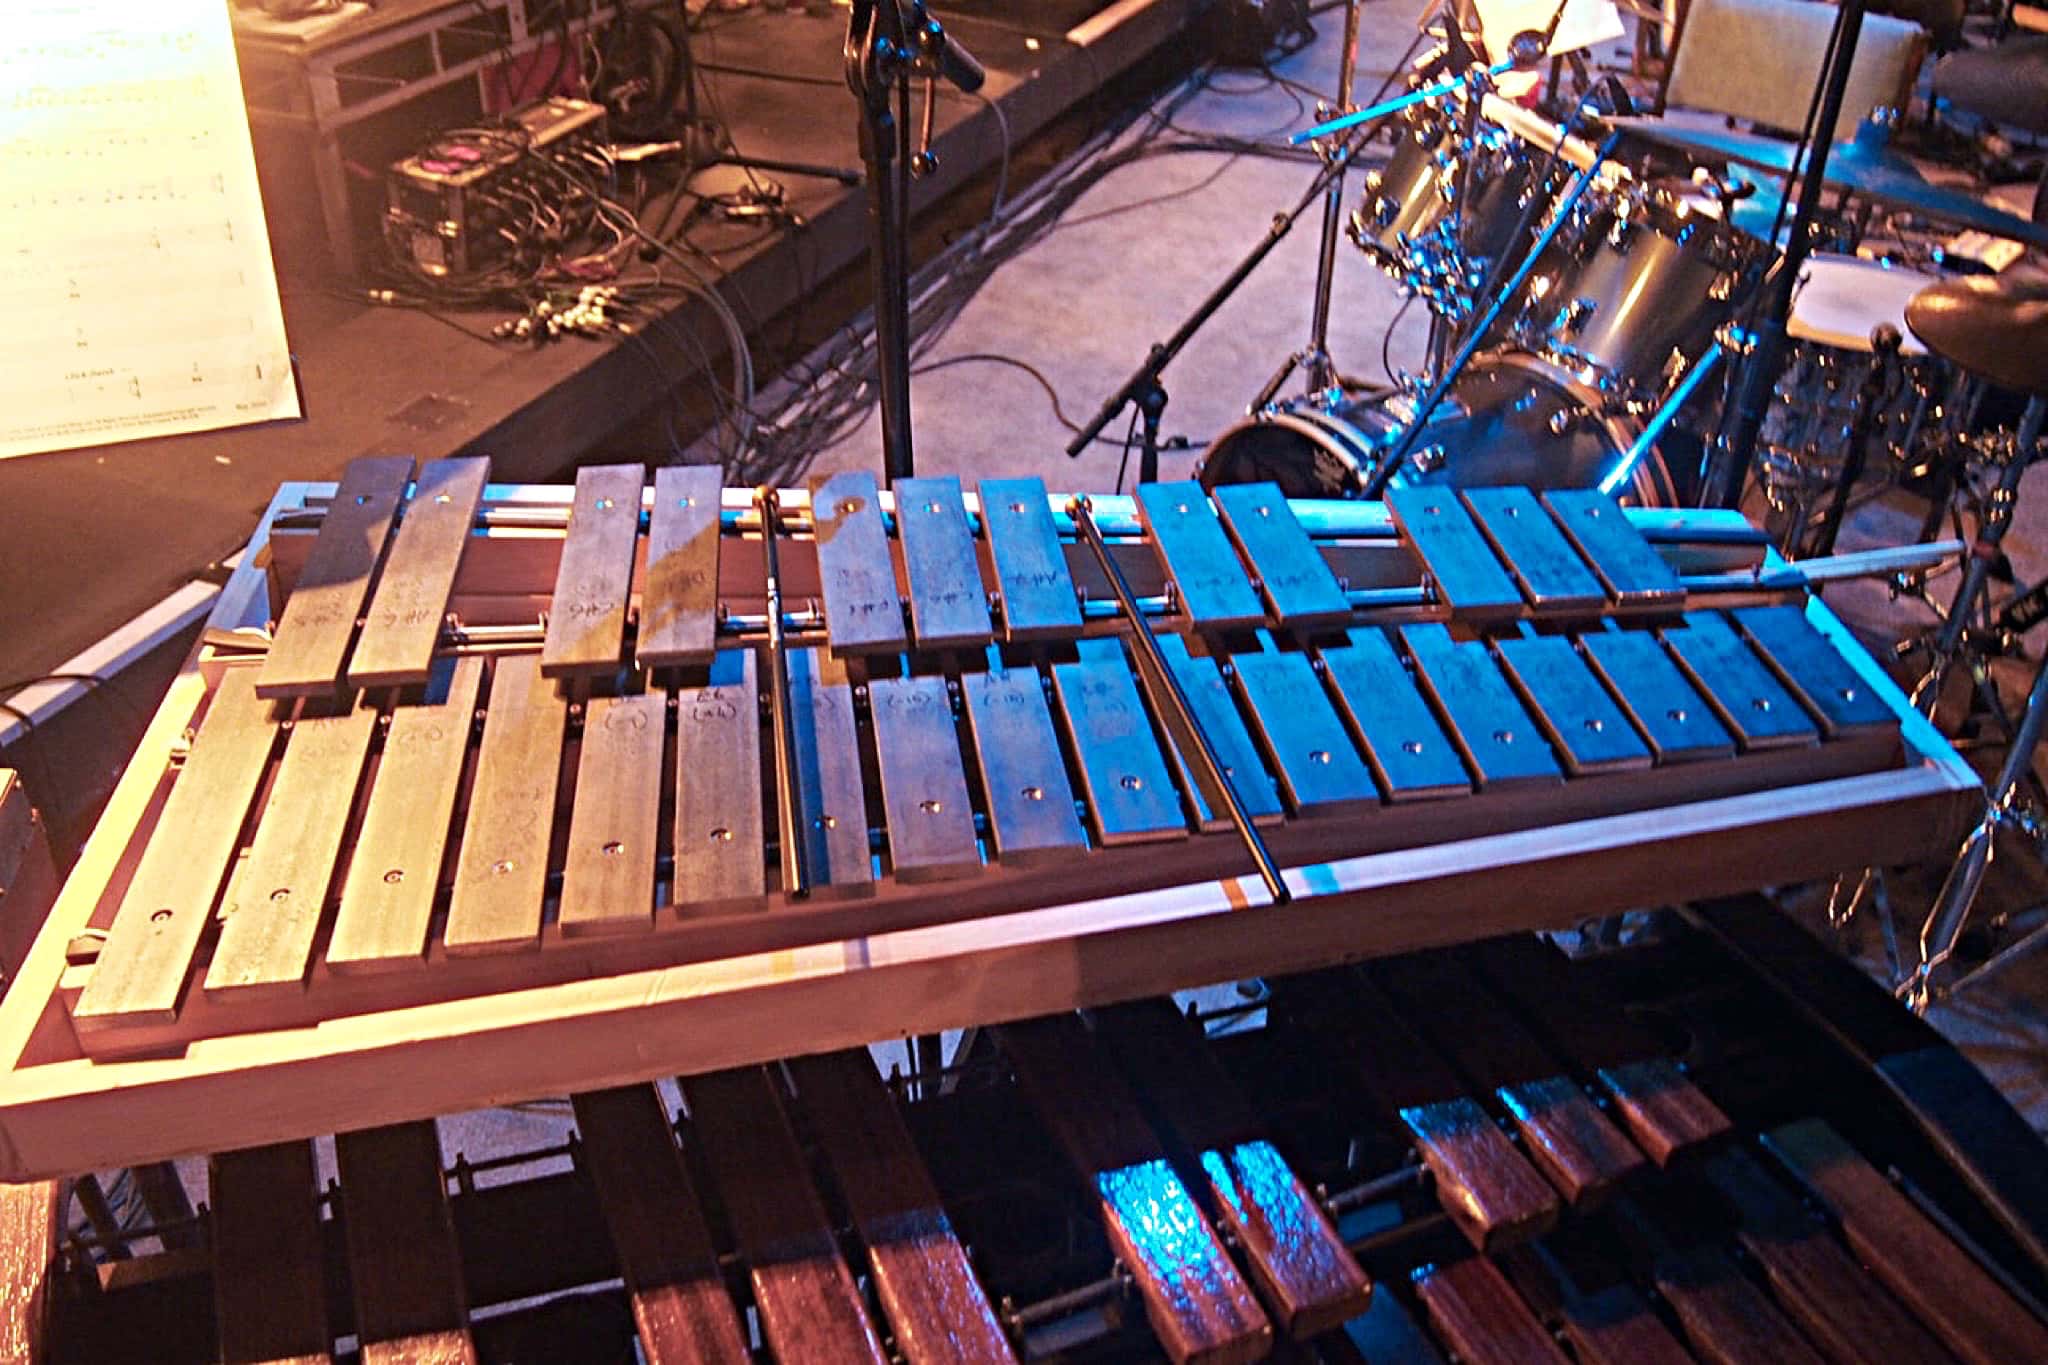 Craig Given’s percussion setup for Showbiz Christchurch’s production of Evita at the Isaac Theatre Royal in Christchurch, New Zealand.